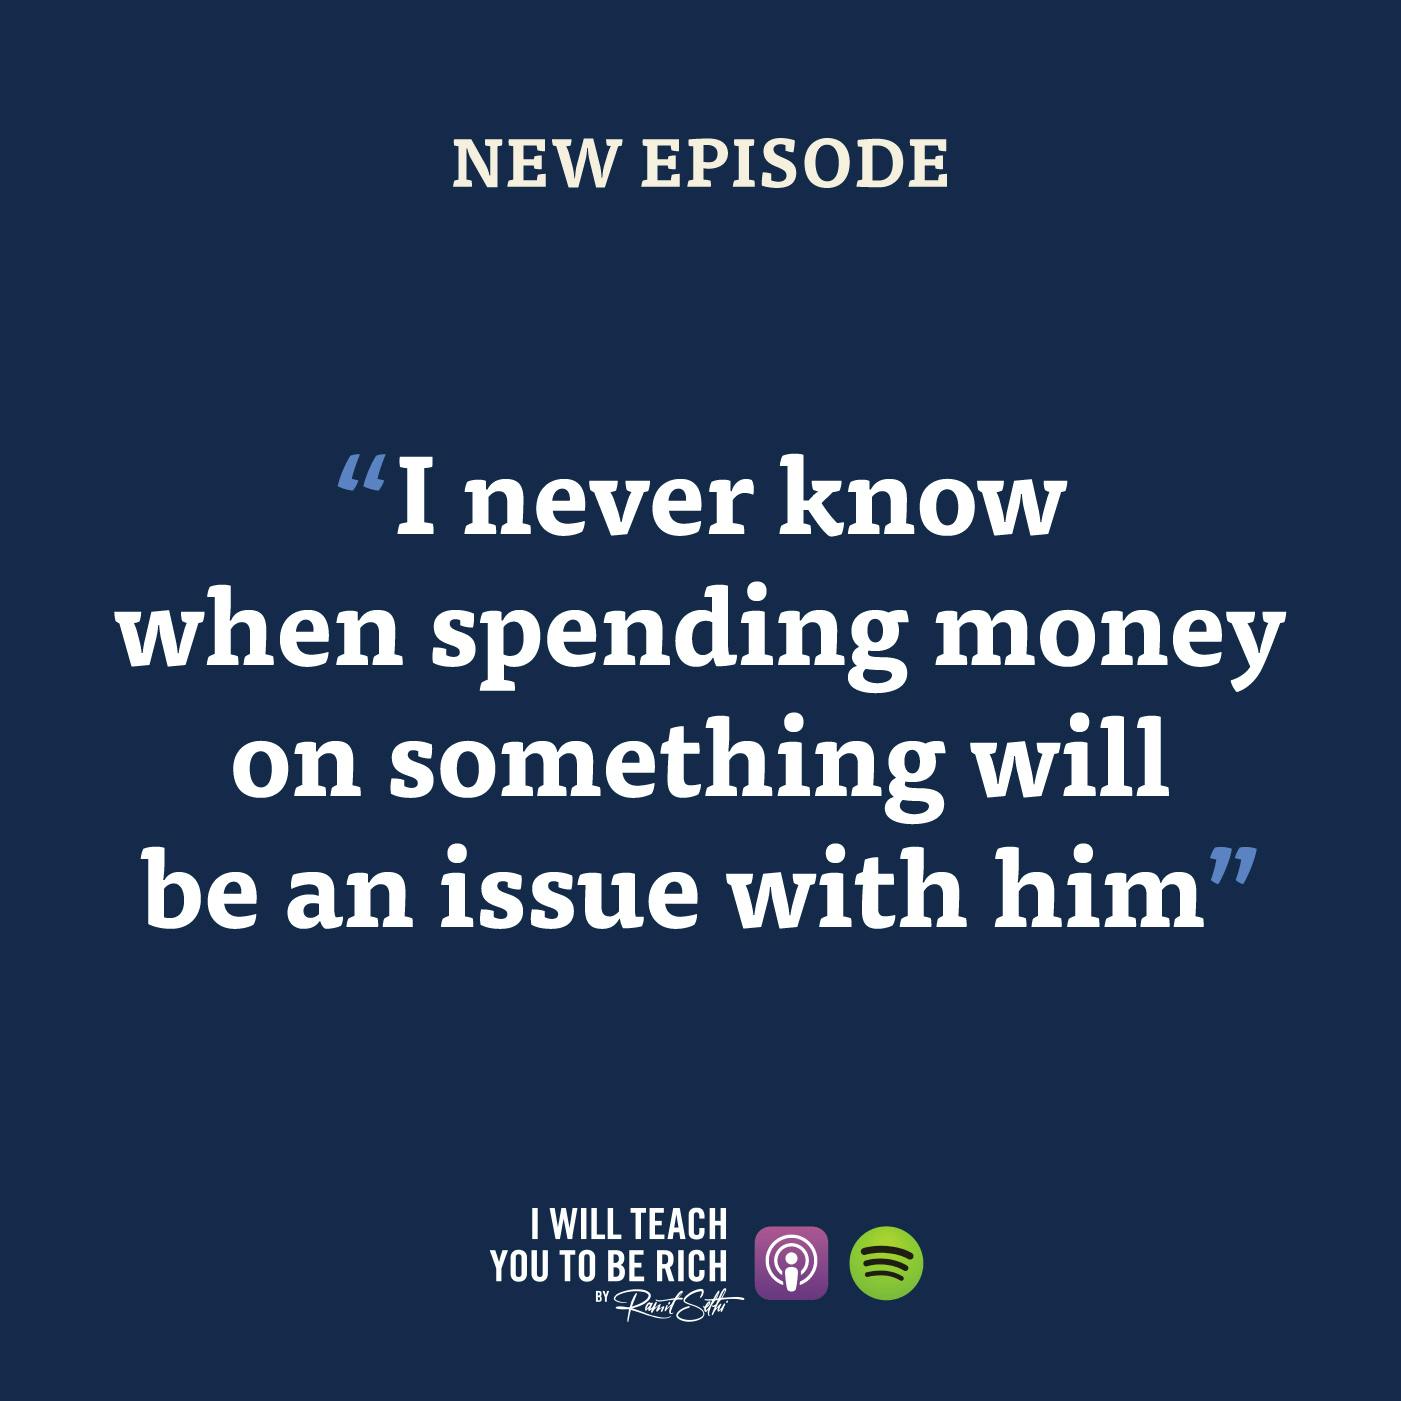 29. “I never know when spending money on something will be an issue with him”